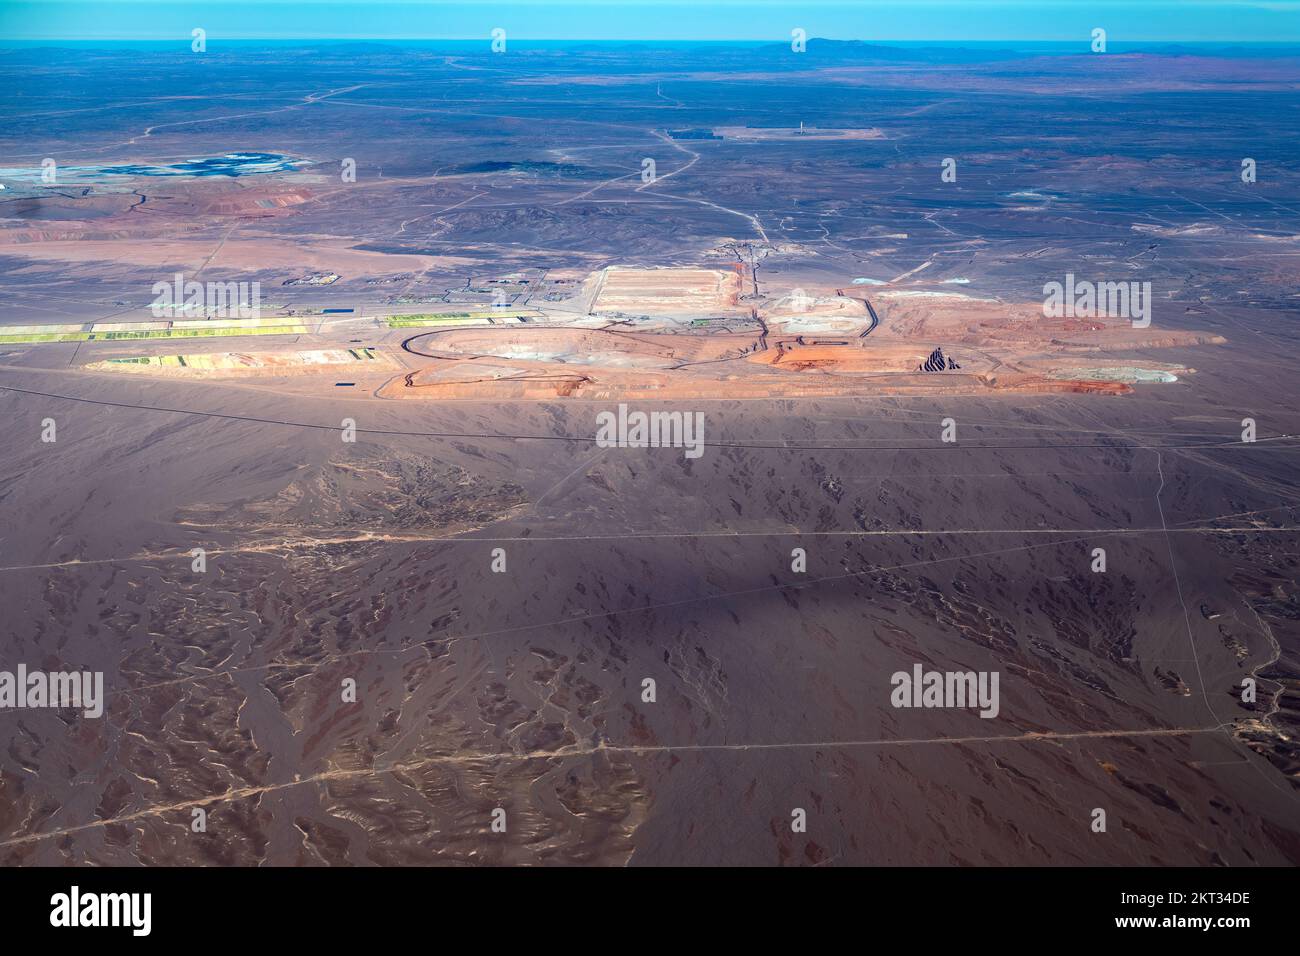 Aerial view of copper mining operations at the Atacama Desert in northern Chile Stock Photo